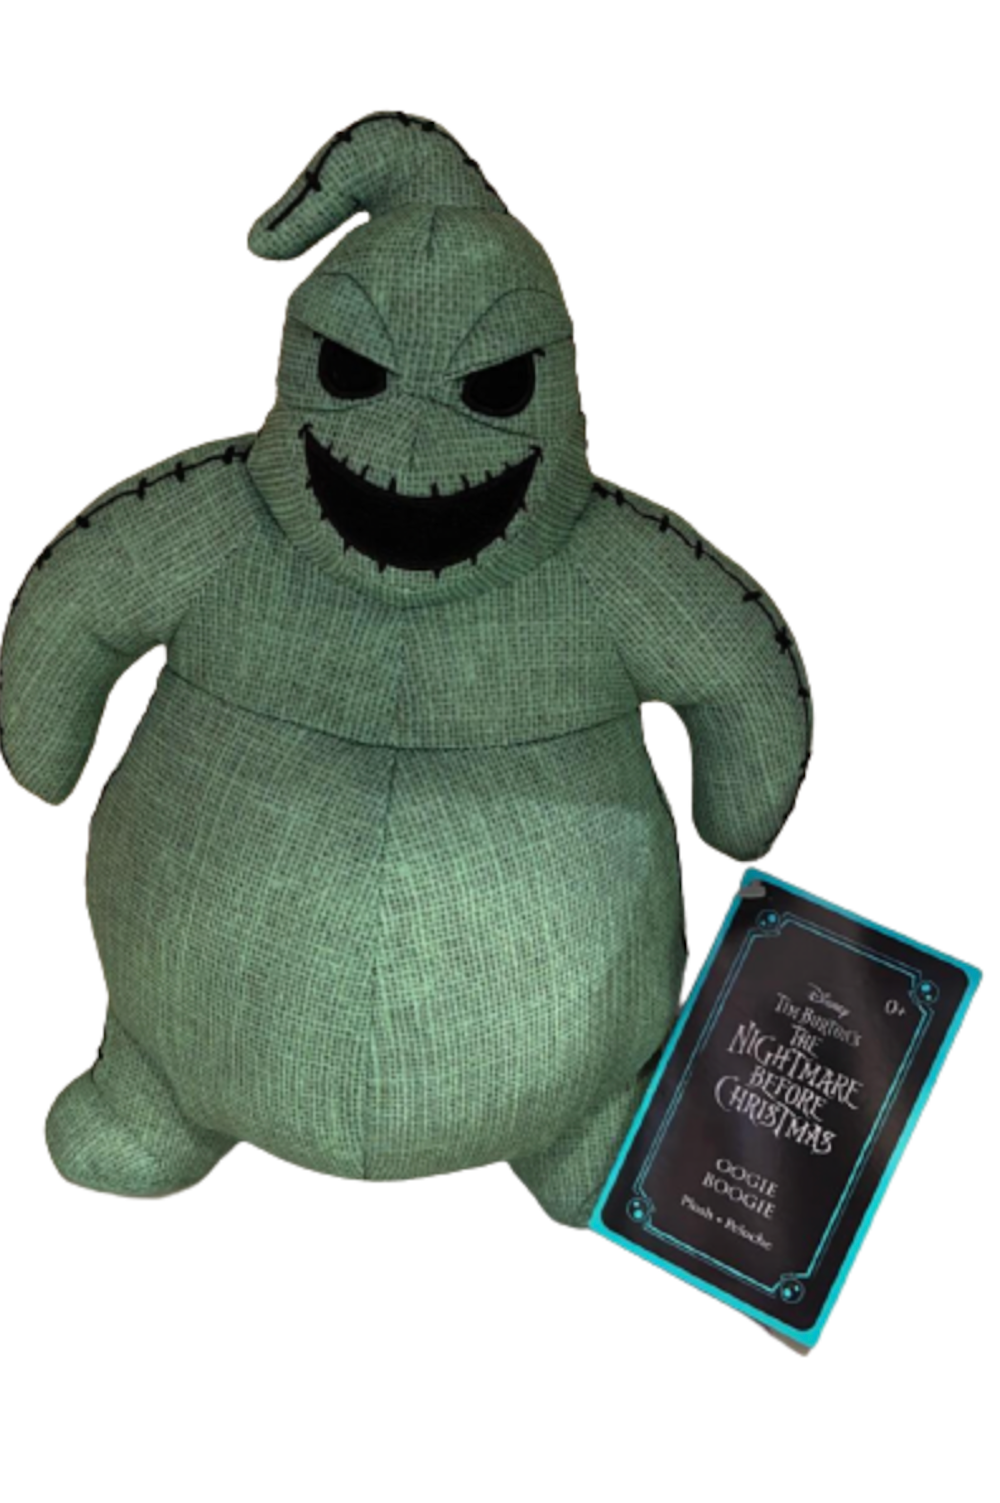 Disney Parks The Nightmare Before Christmas Oogie Boogie Plush New with Tag